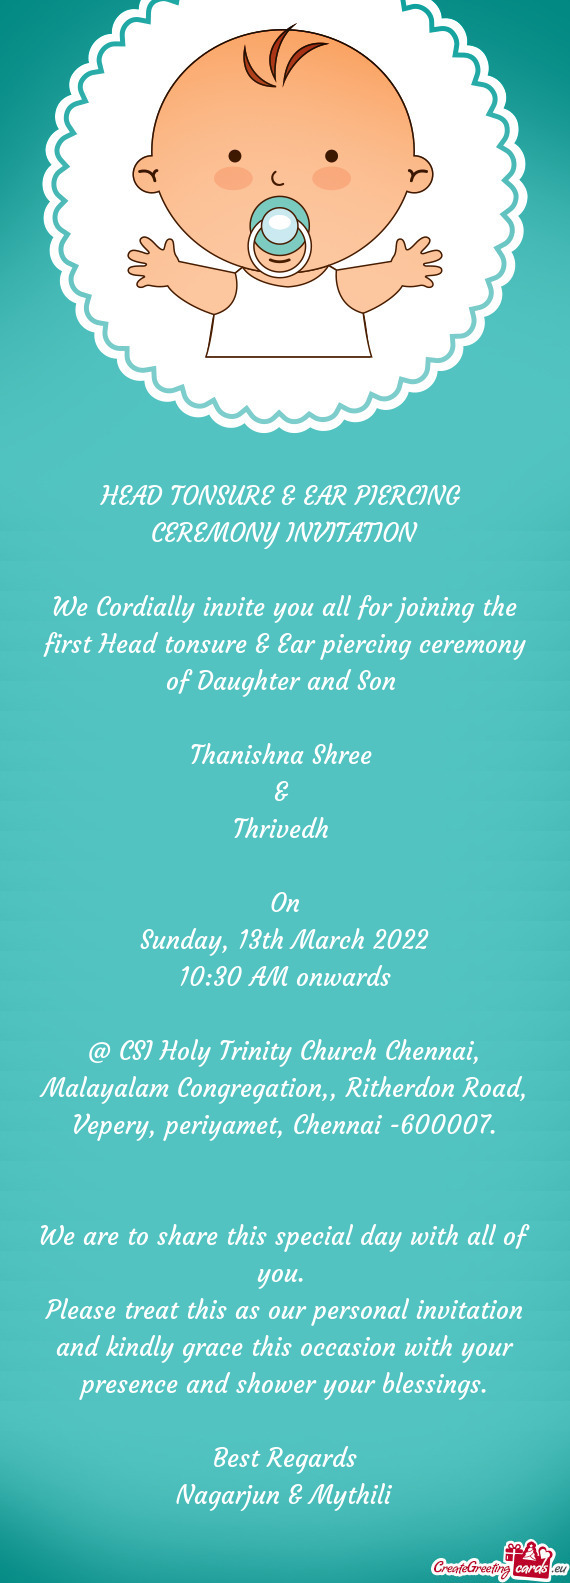 We Cordially invite you all for joining the first Head tonsure & Ear piercing ceremony of Daughter a